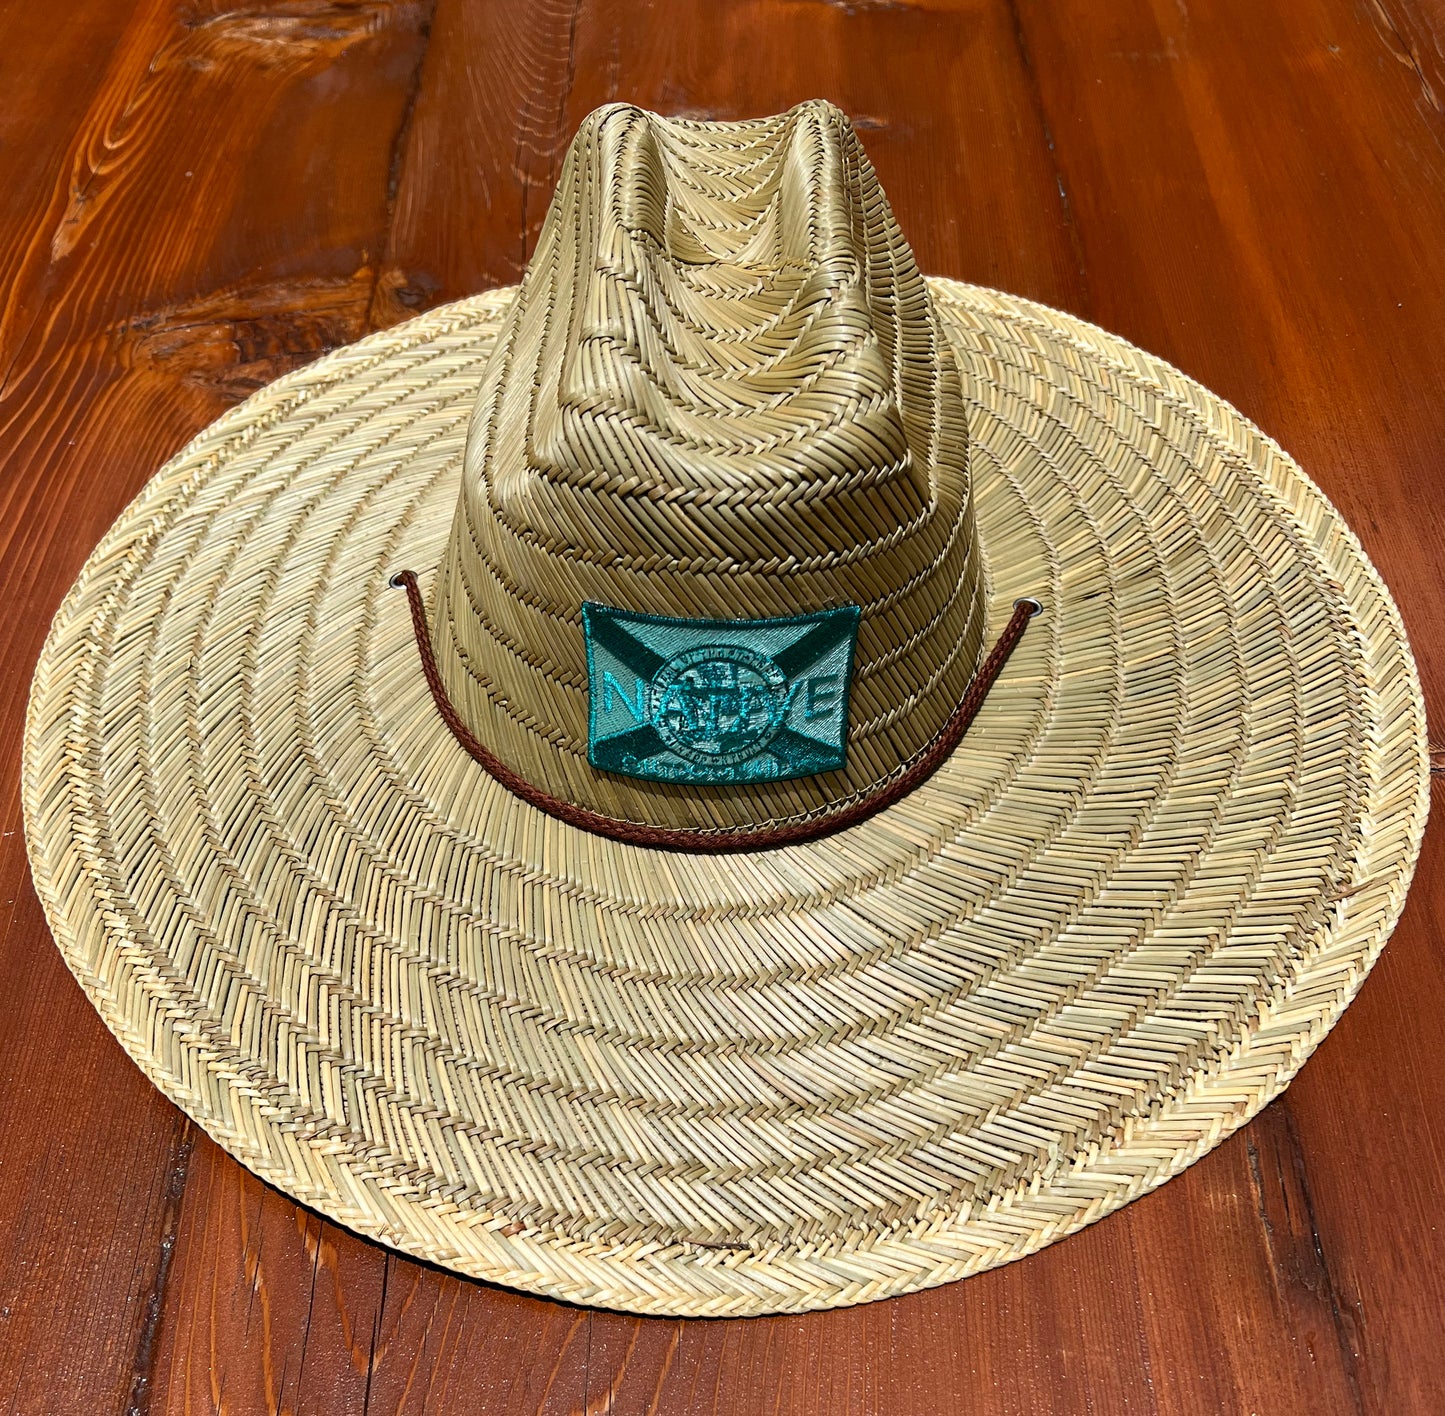 Native Outdoor Life Blue Skies Straw Hat